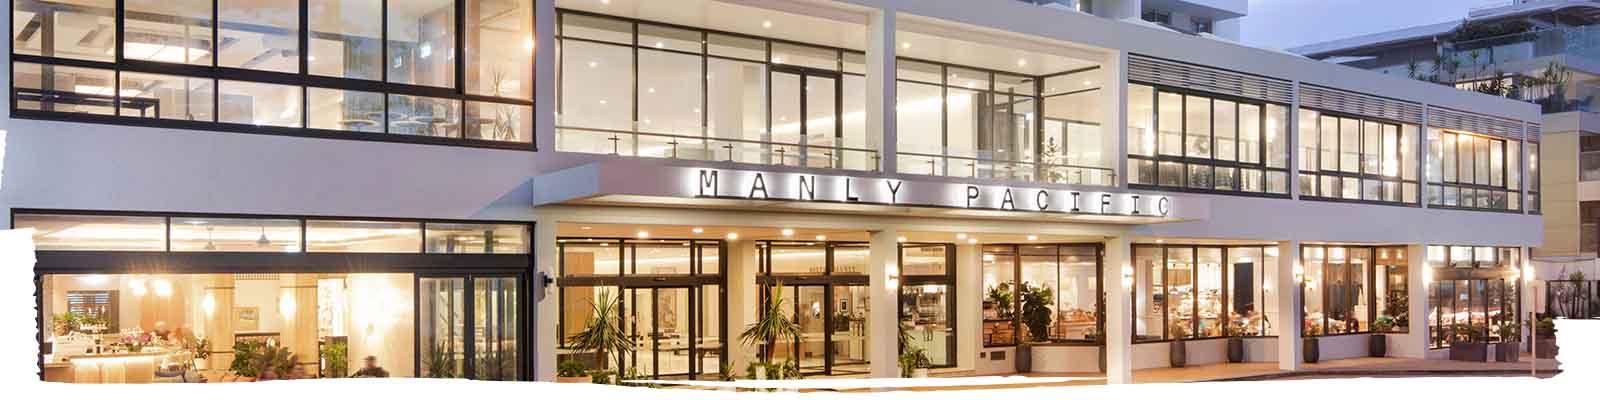 manly pacific hotel